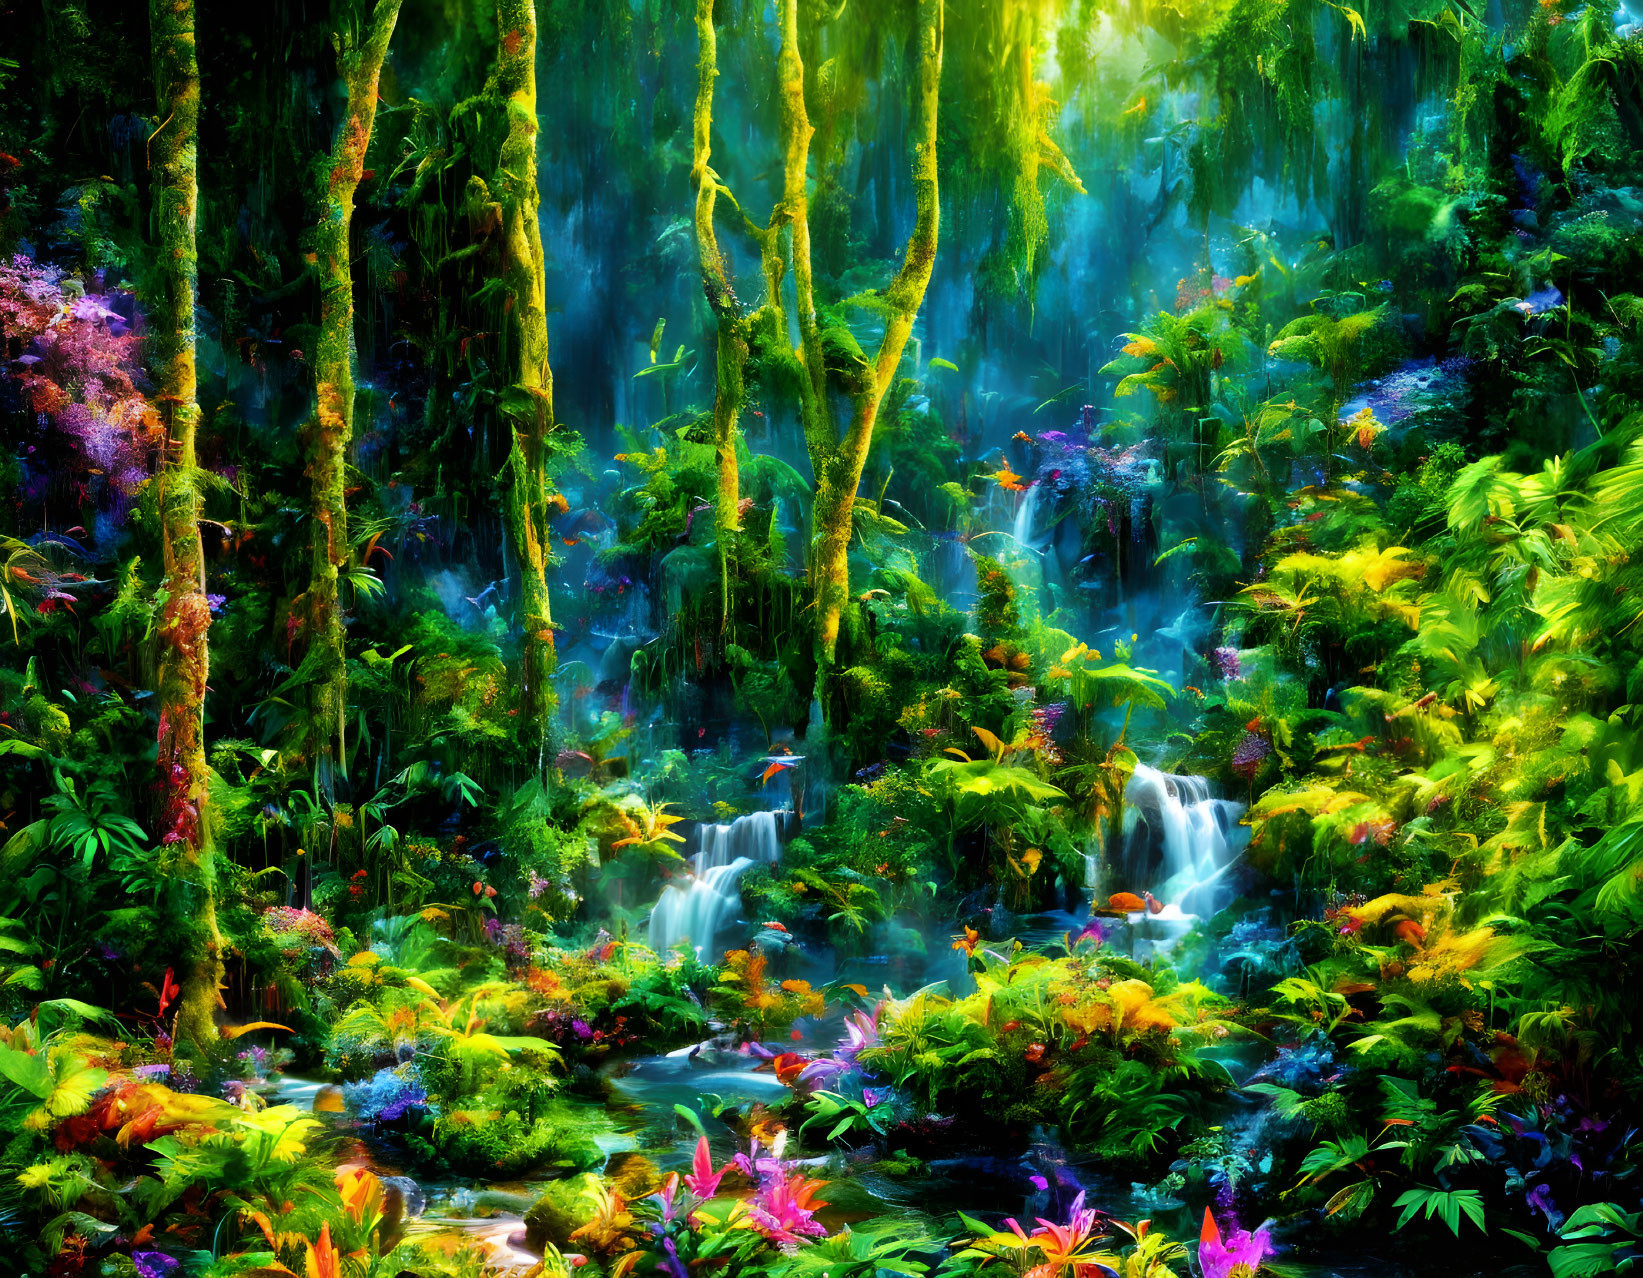 Lush Jungle with Waterfalls and Colorful Plants